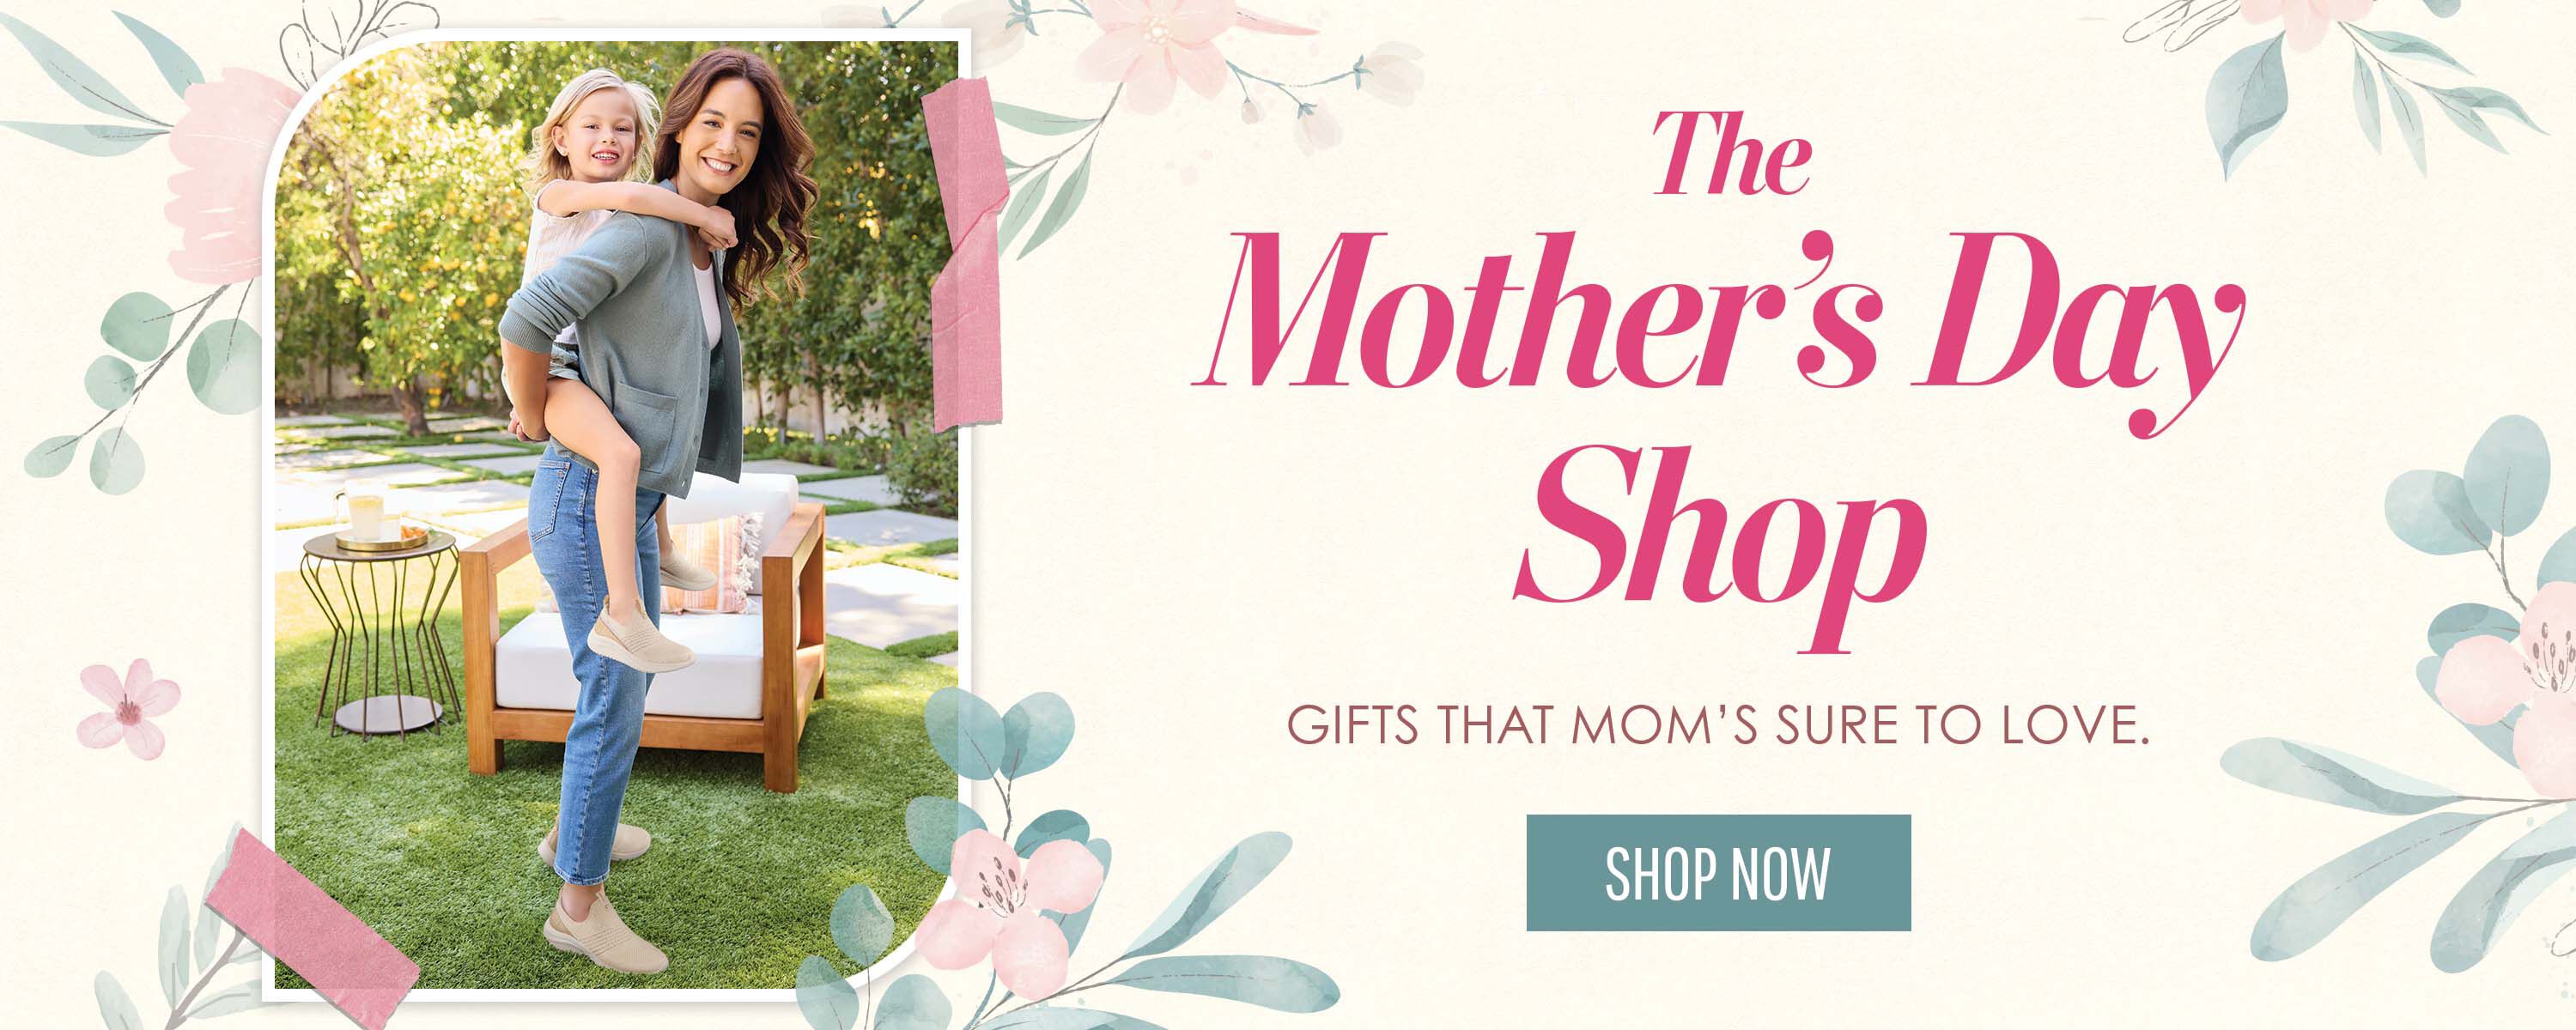 The Mother's Day Shop - Gifts that mom's sure to love ~ SHOP NOW